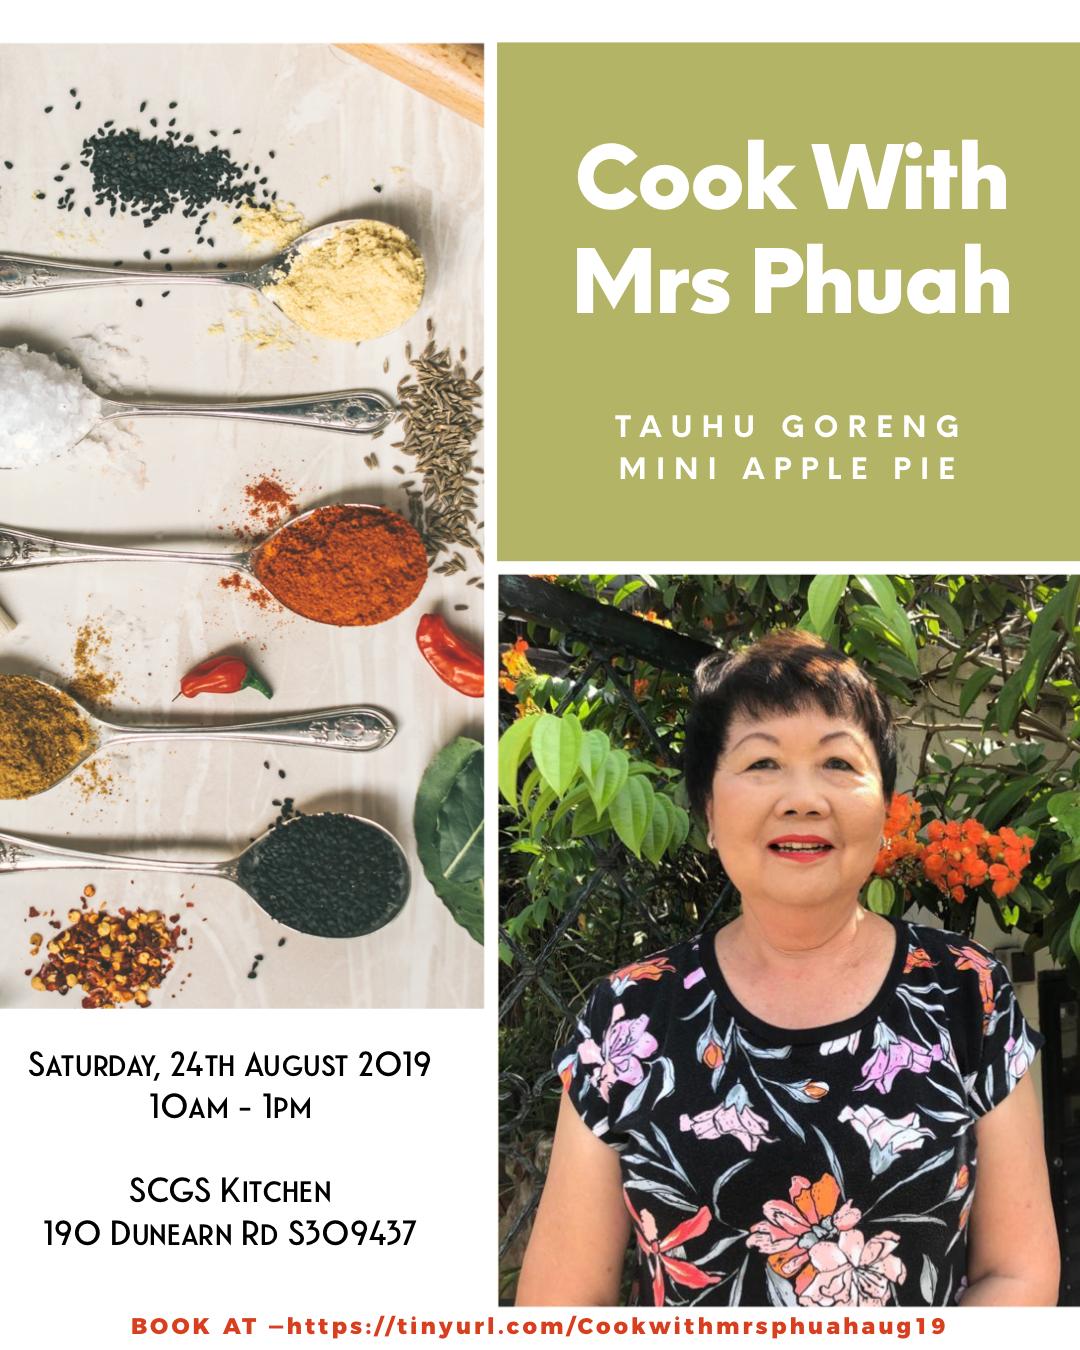 Cook On with Mrs Phuah!